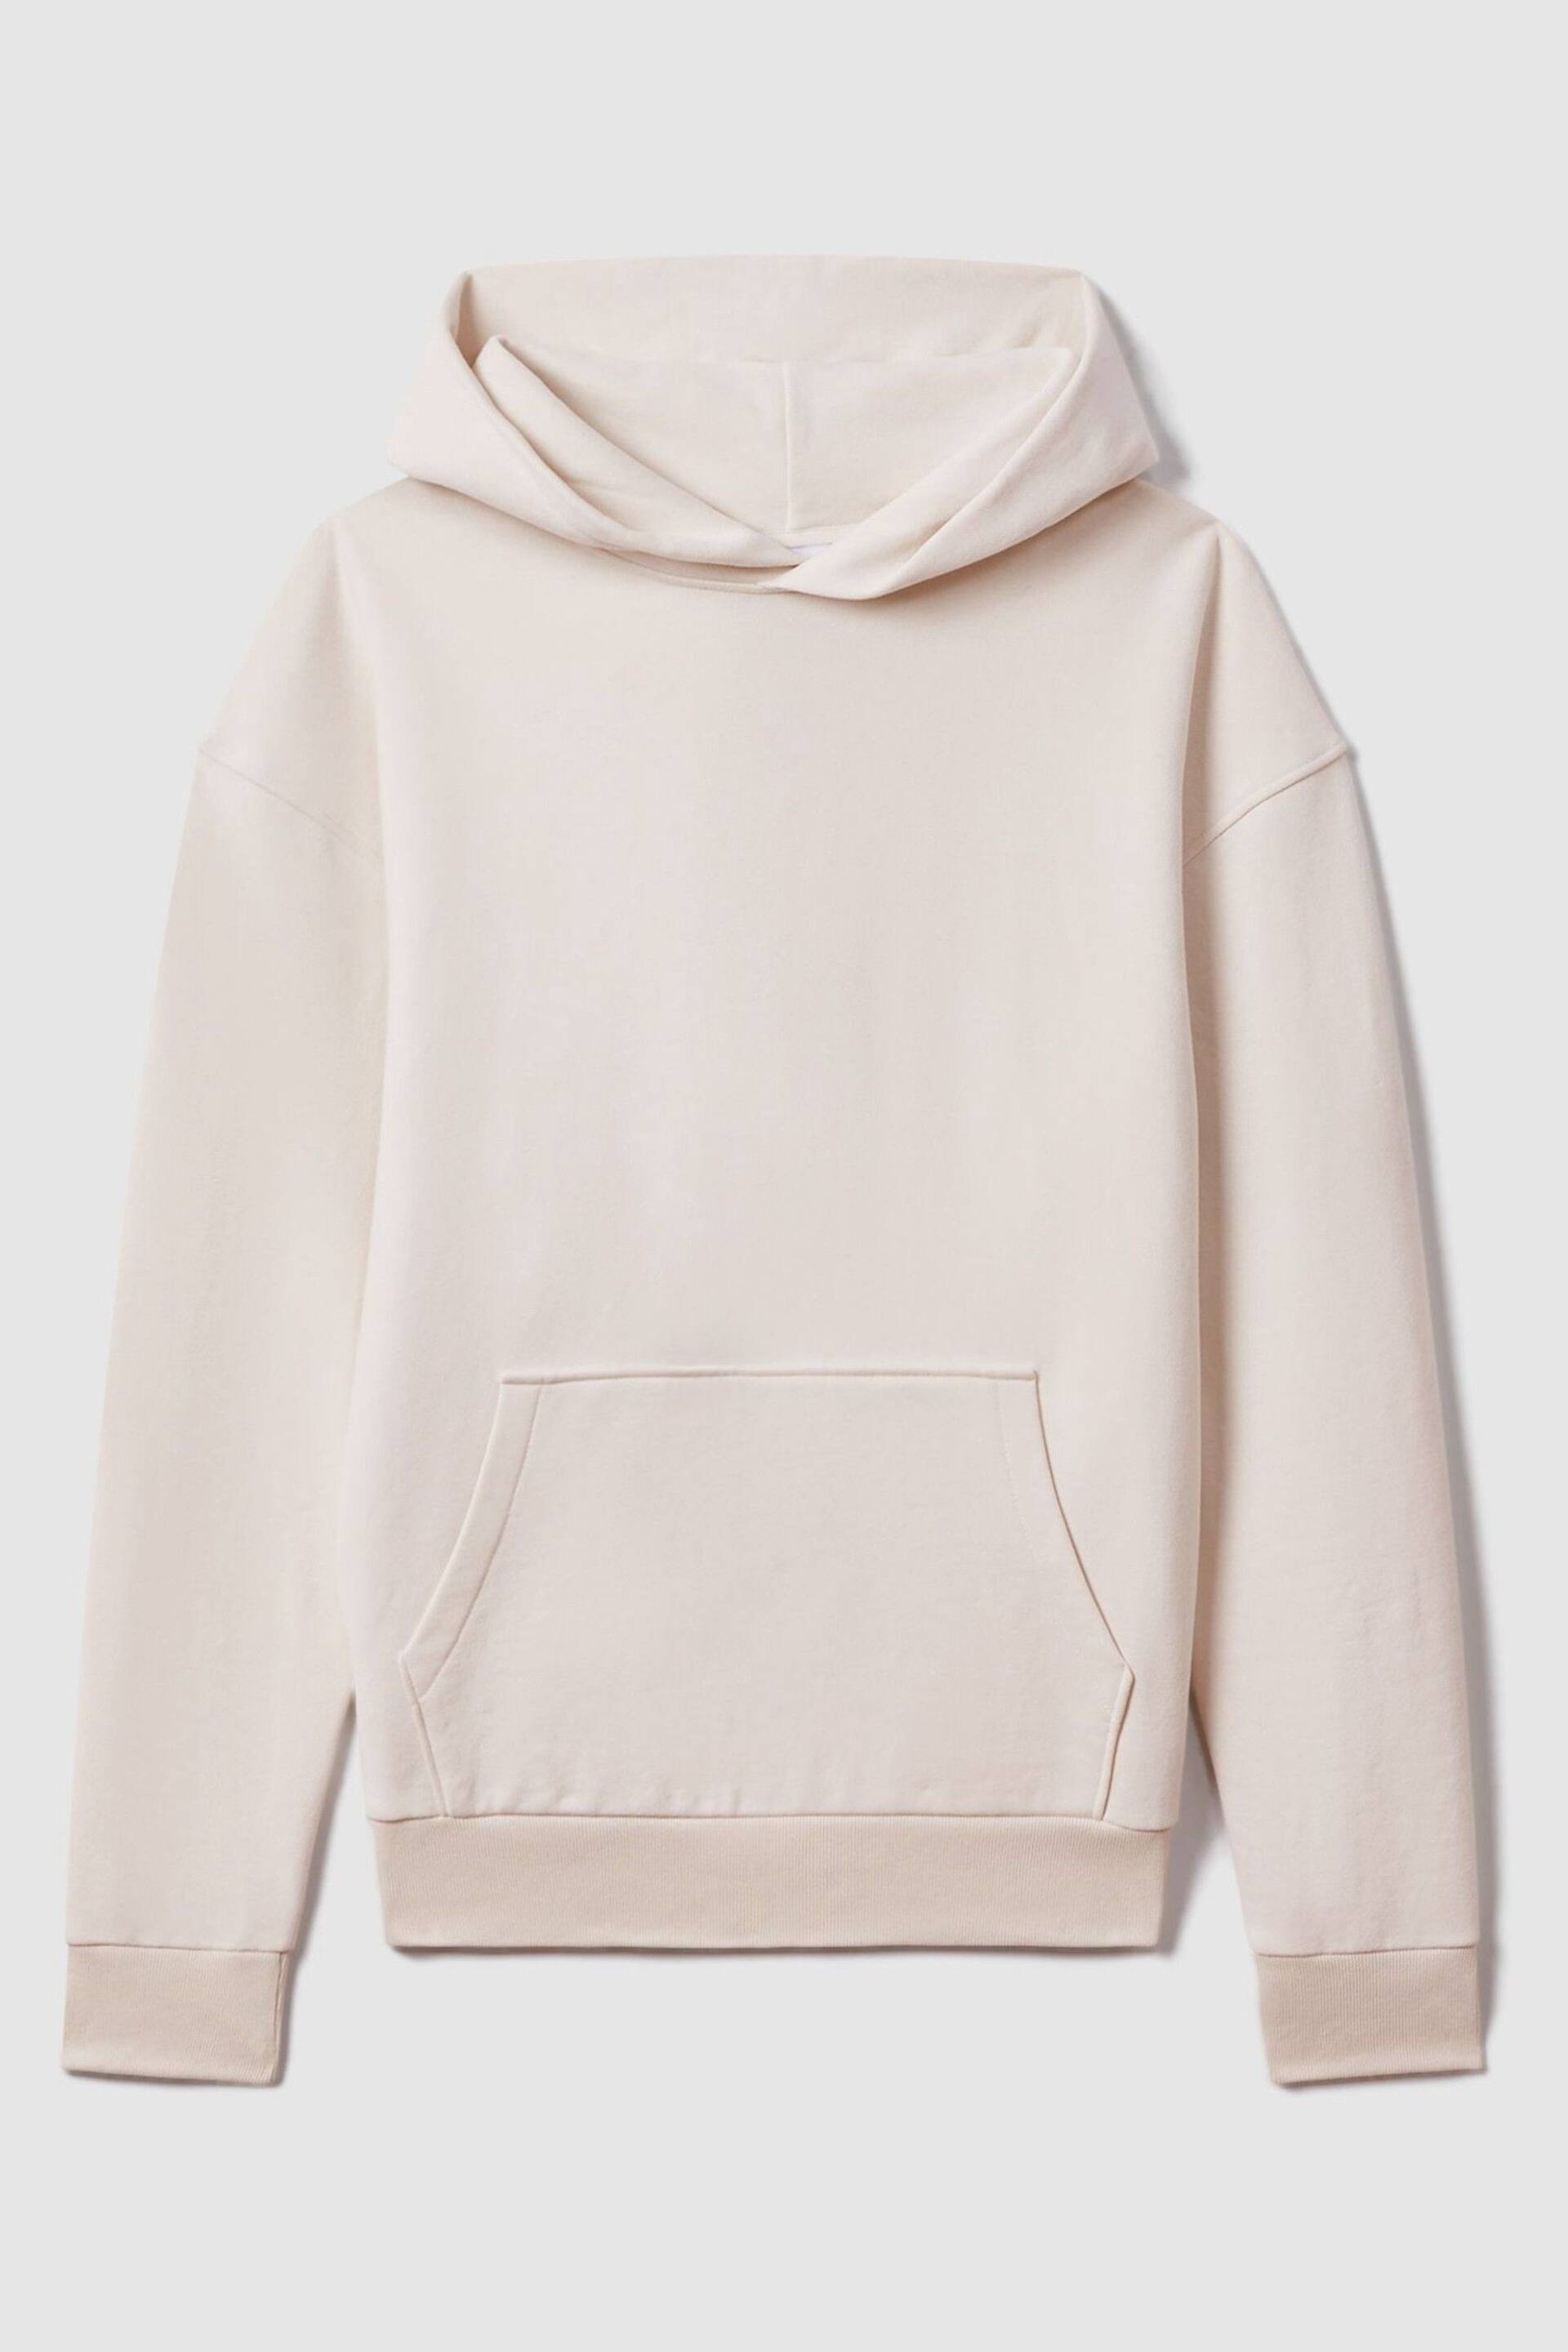 Reiss Off White Alexander Casual Fit Cotton Hoodie - Image 2 of 6